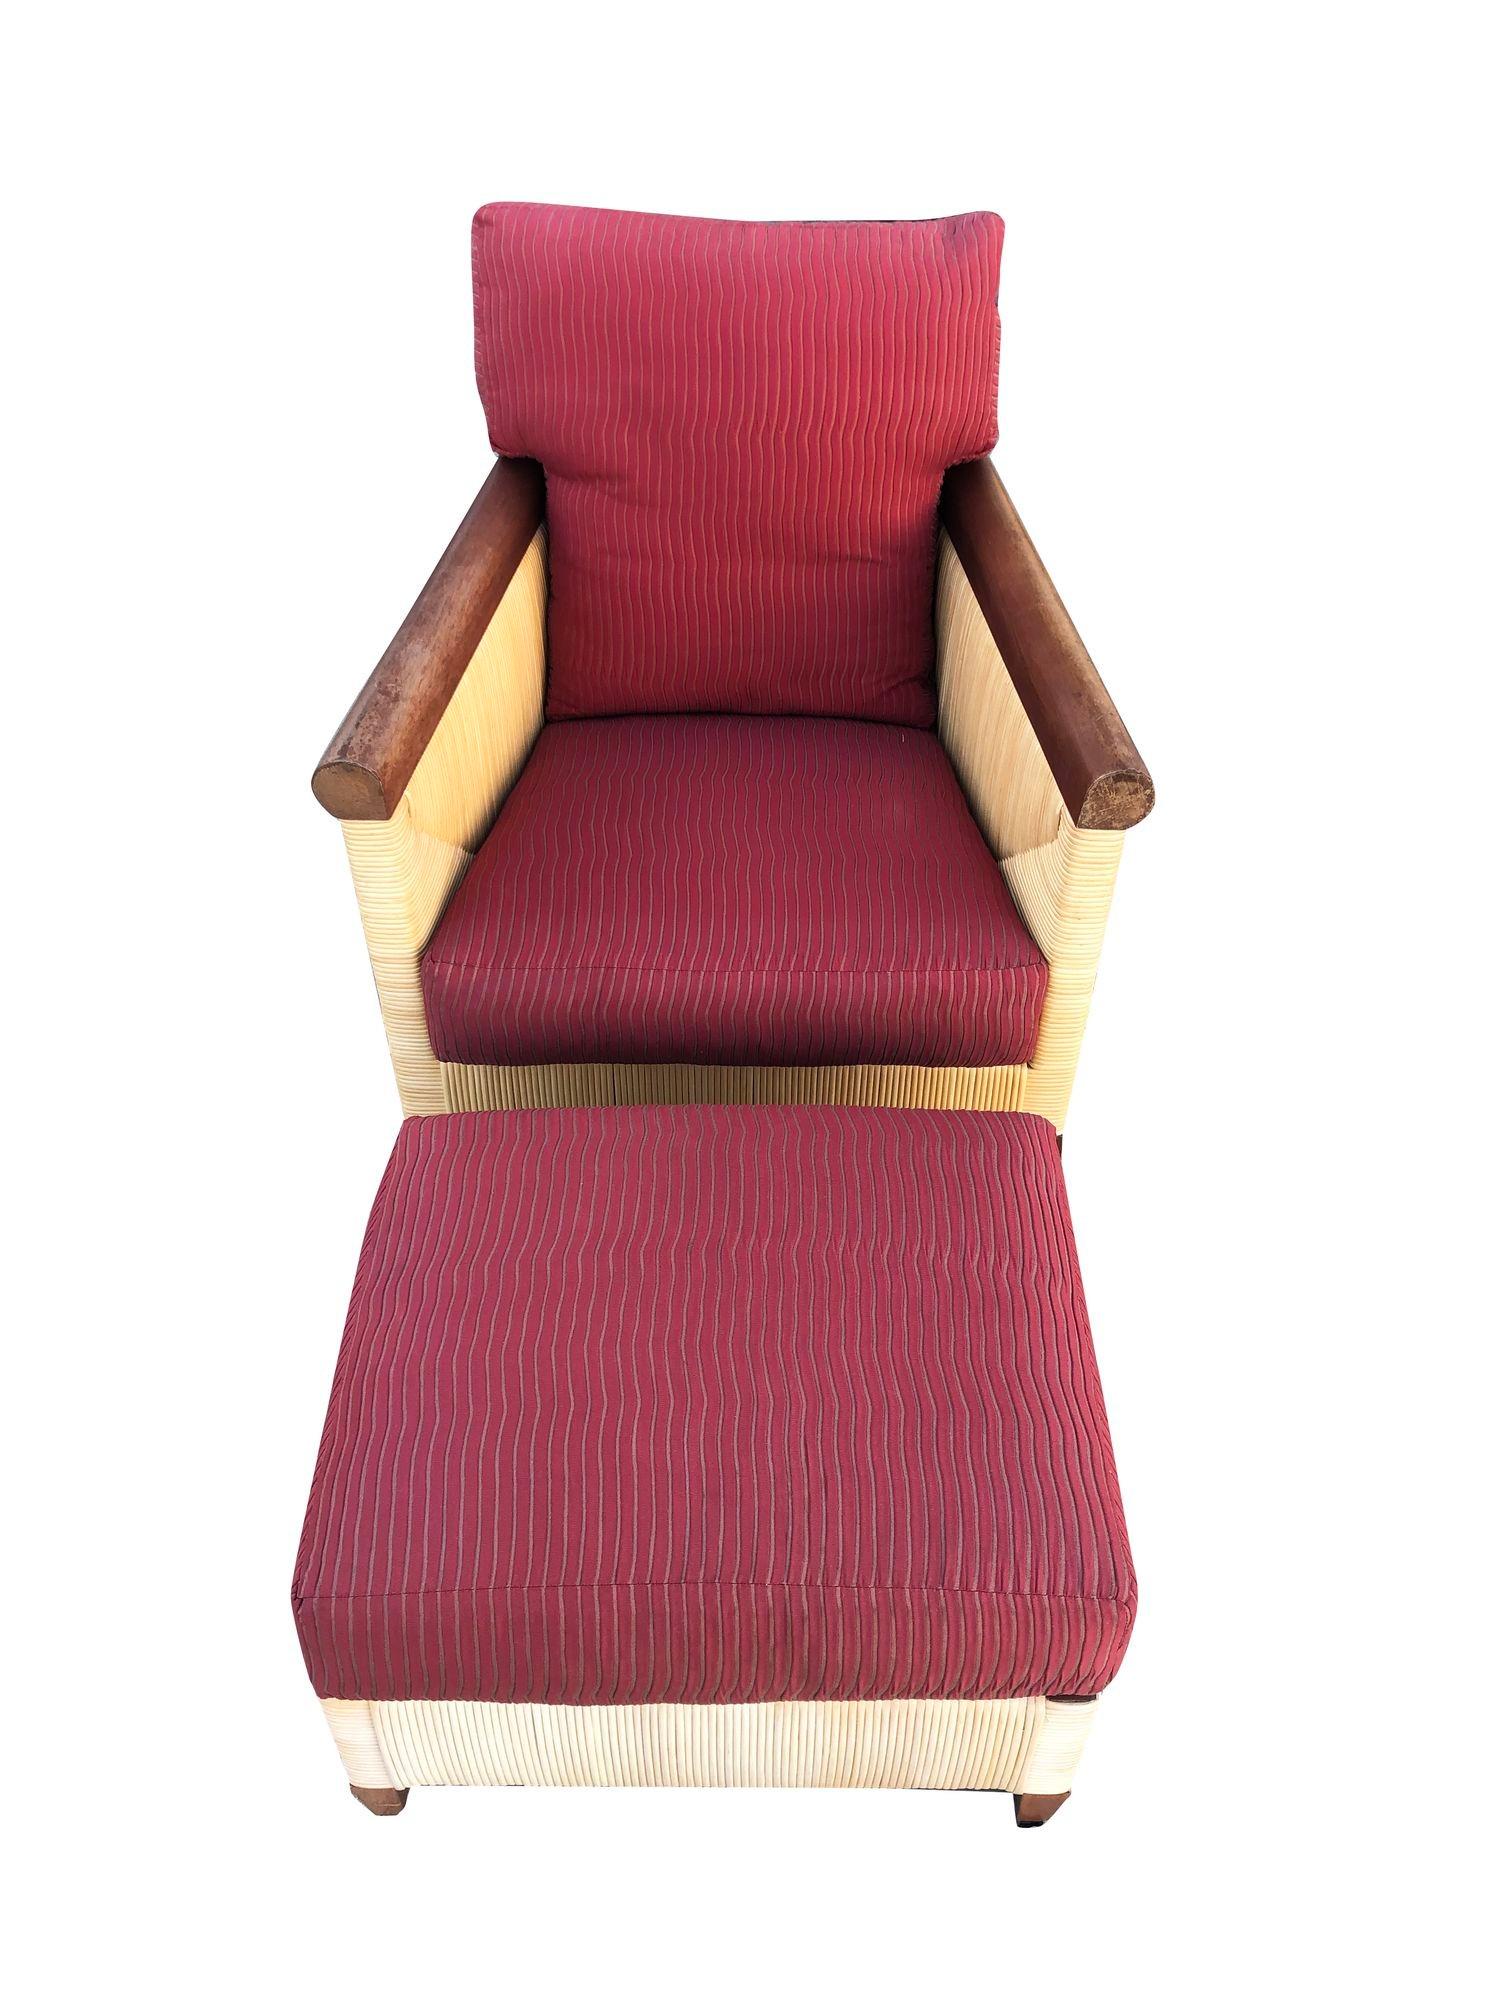 A stunning brown mahogany organic modern rush cane lounge chair with ottoman from the limited production Merbau Collection designed by John Hutton (1947-2006) for Donghia in 1995. Examples from this particular series are nearly impossible to find